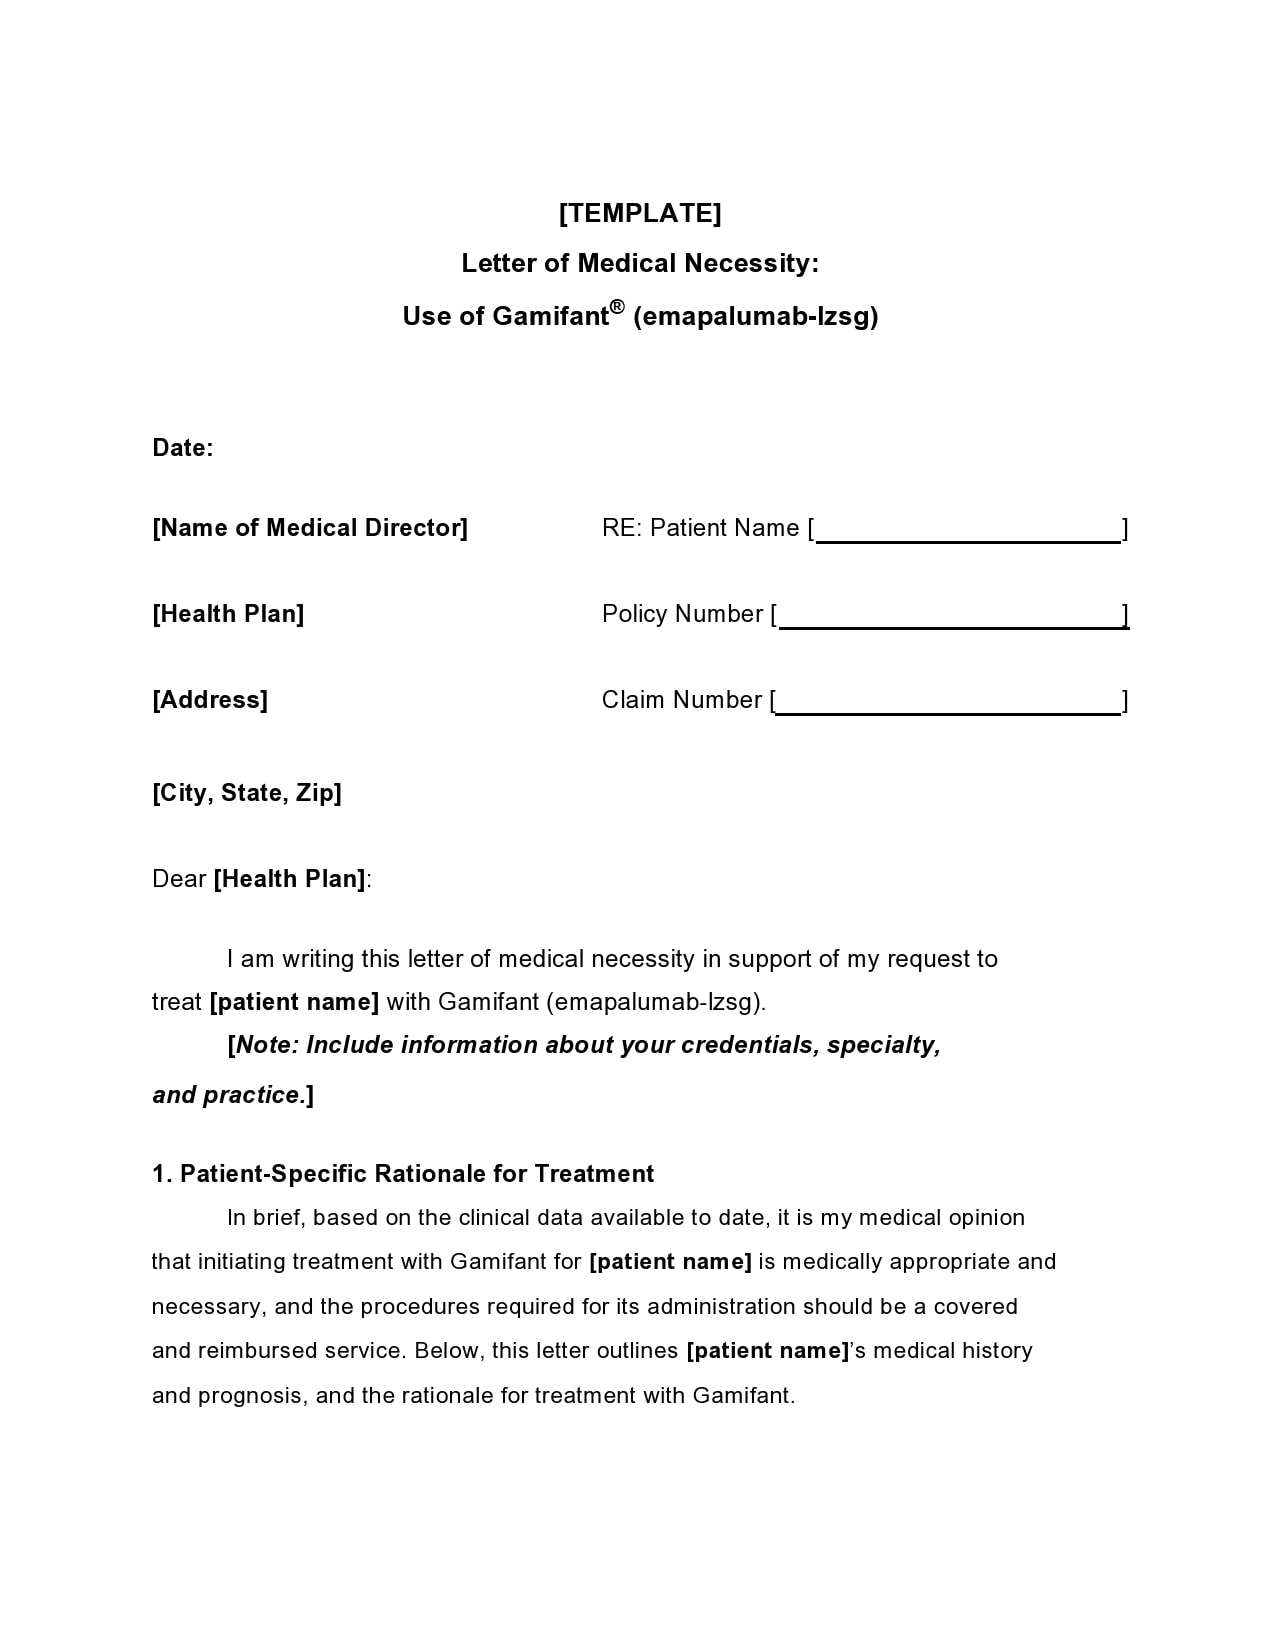 40 Best Letter Of Medical Necessity Templates And Examples 2772